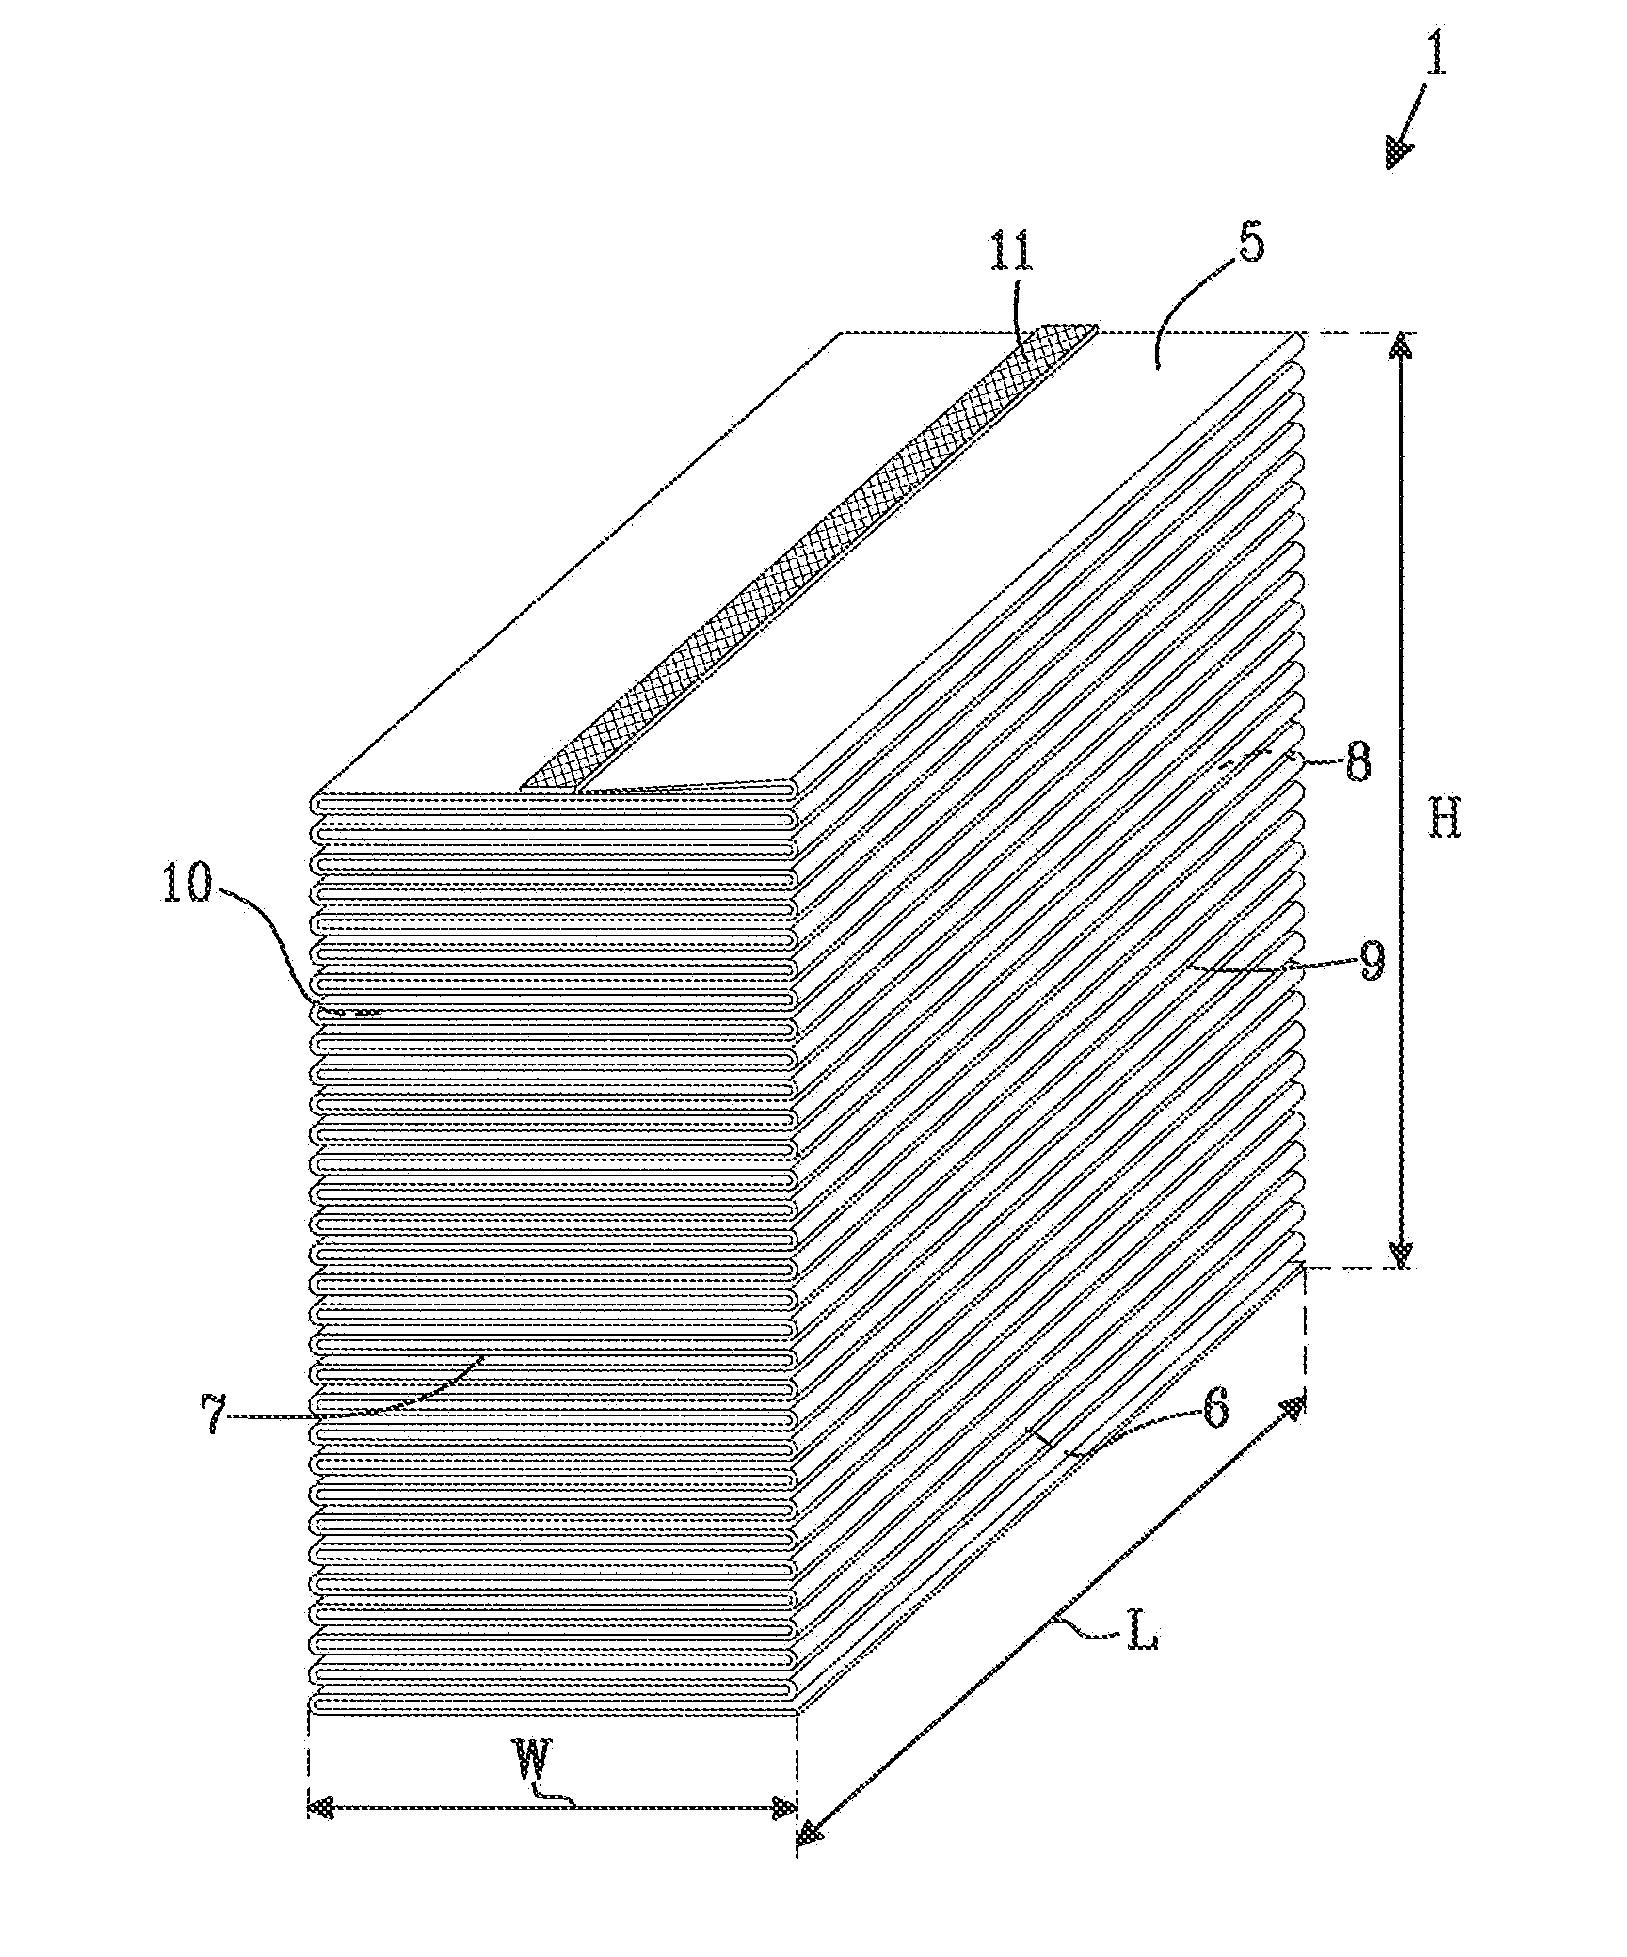 Package comprising a stack of z-folded web material